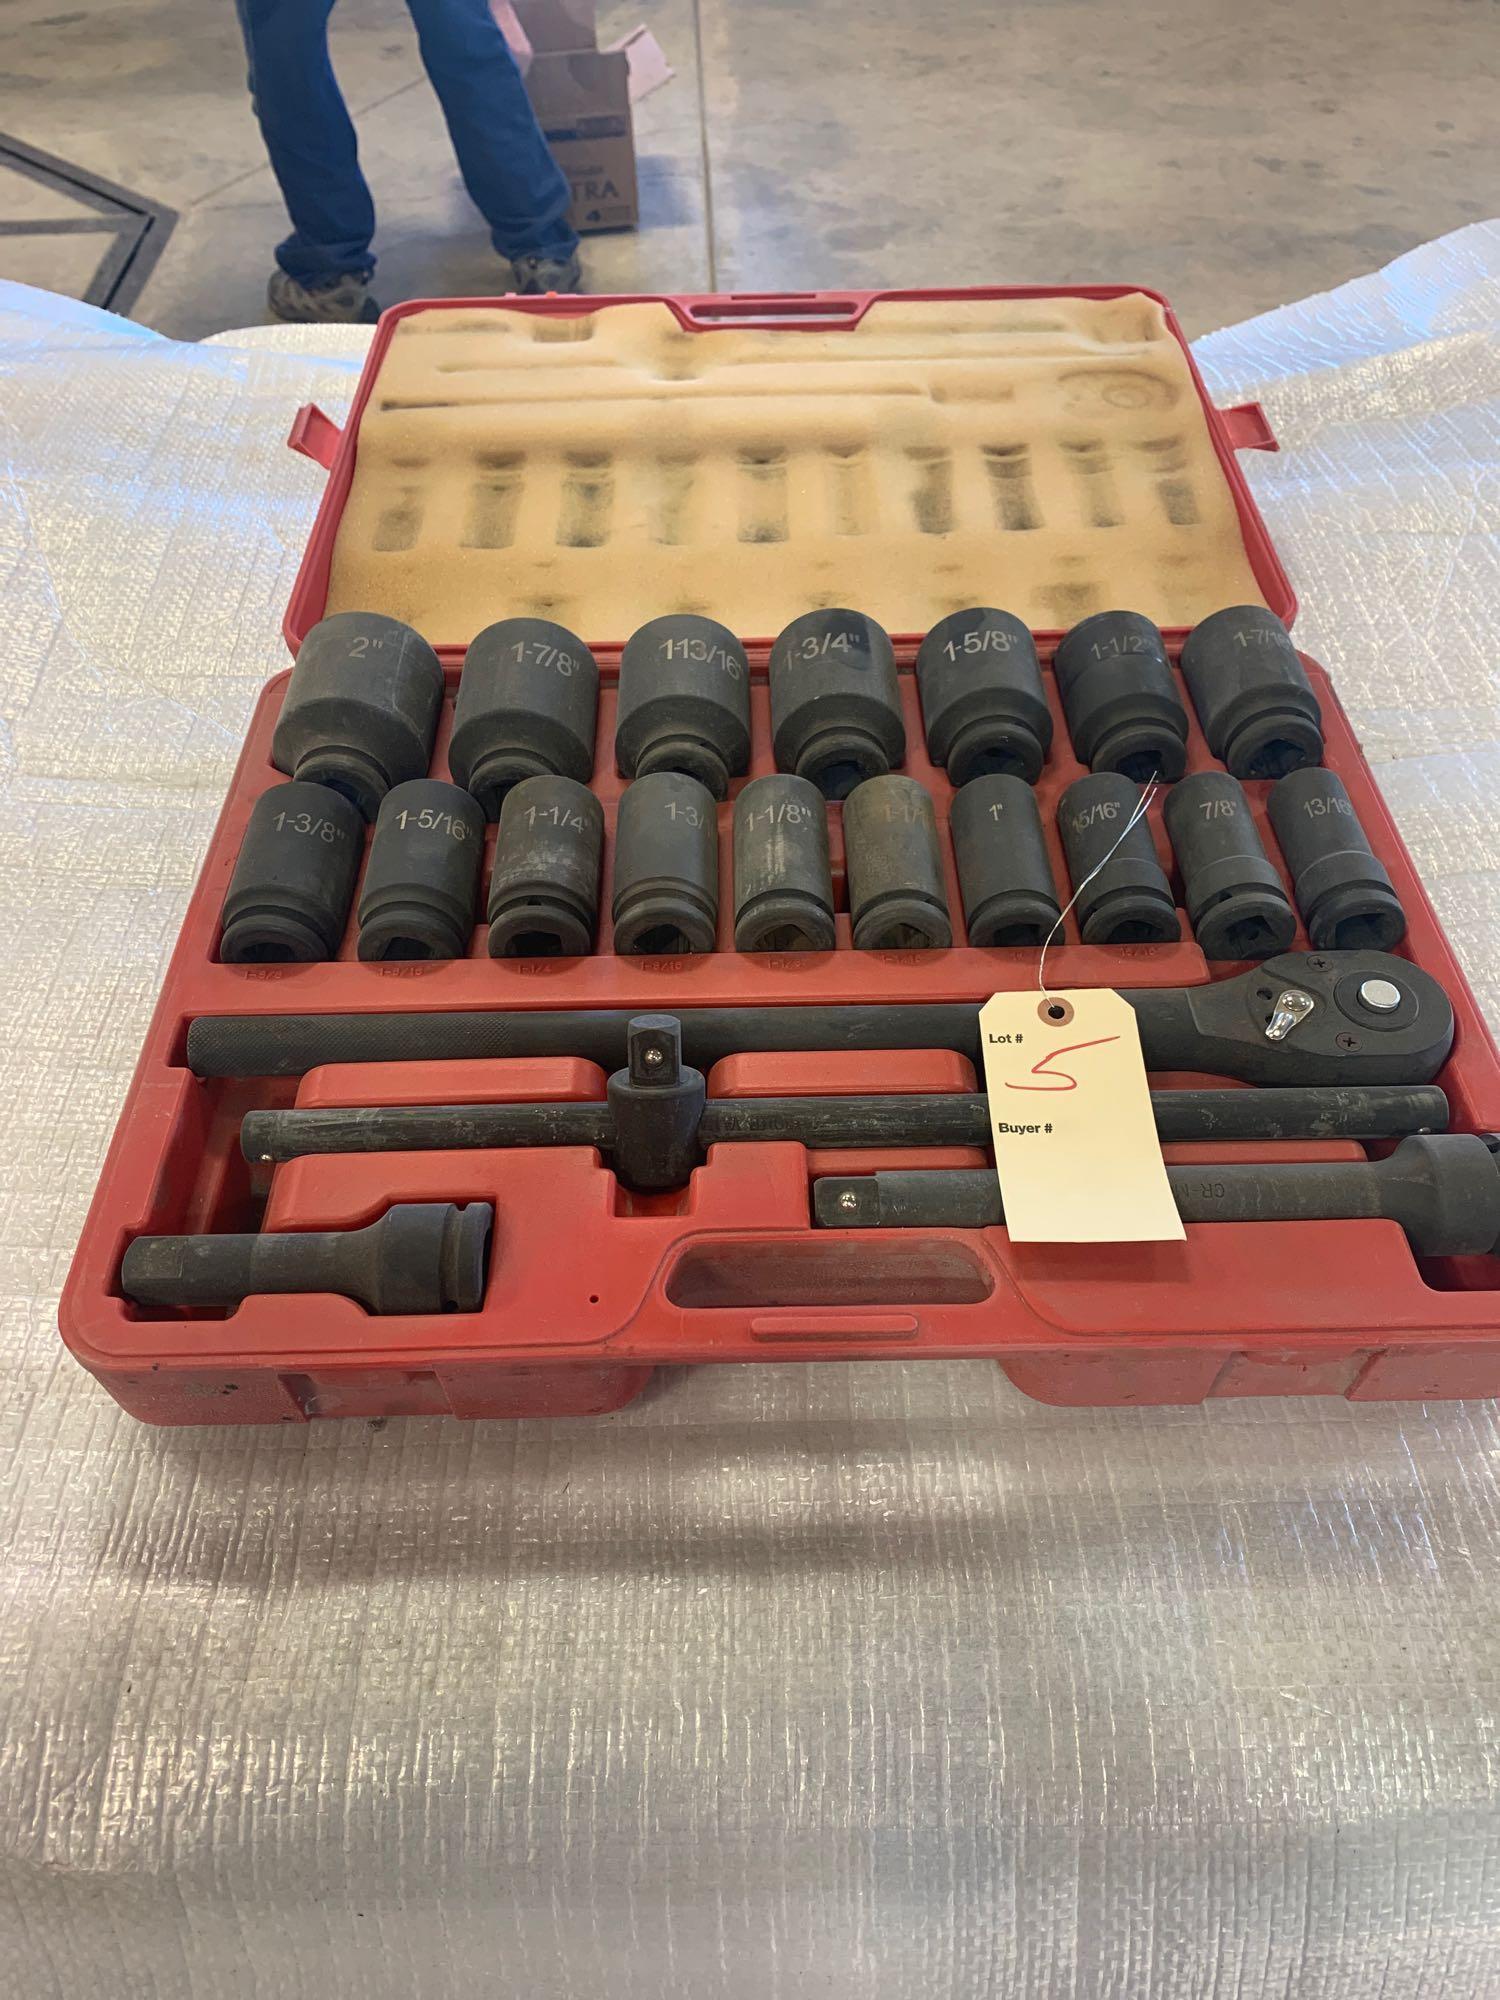 Advanced tool design 3/4'' socket set, from 3/16 up to 2 inch with ratchet, extensions and breaker